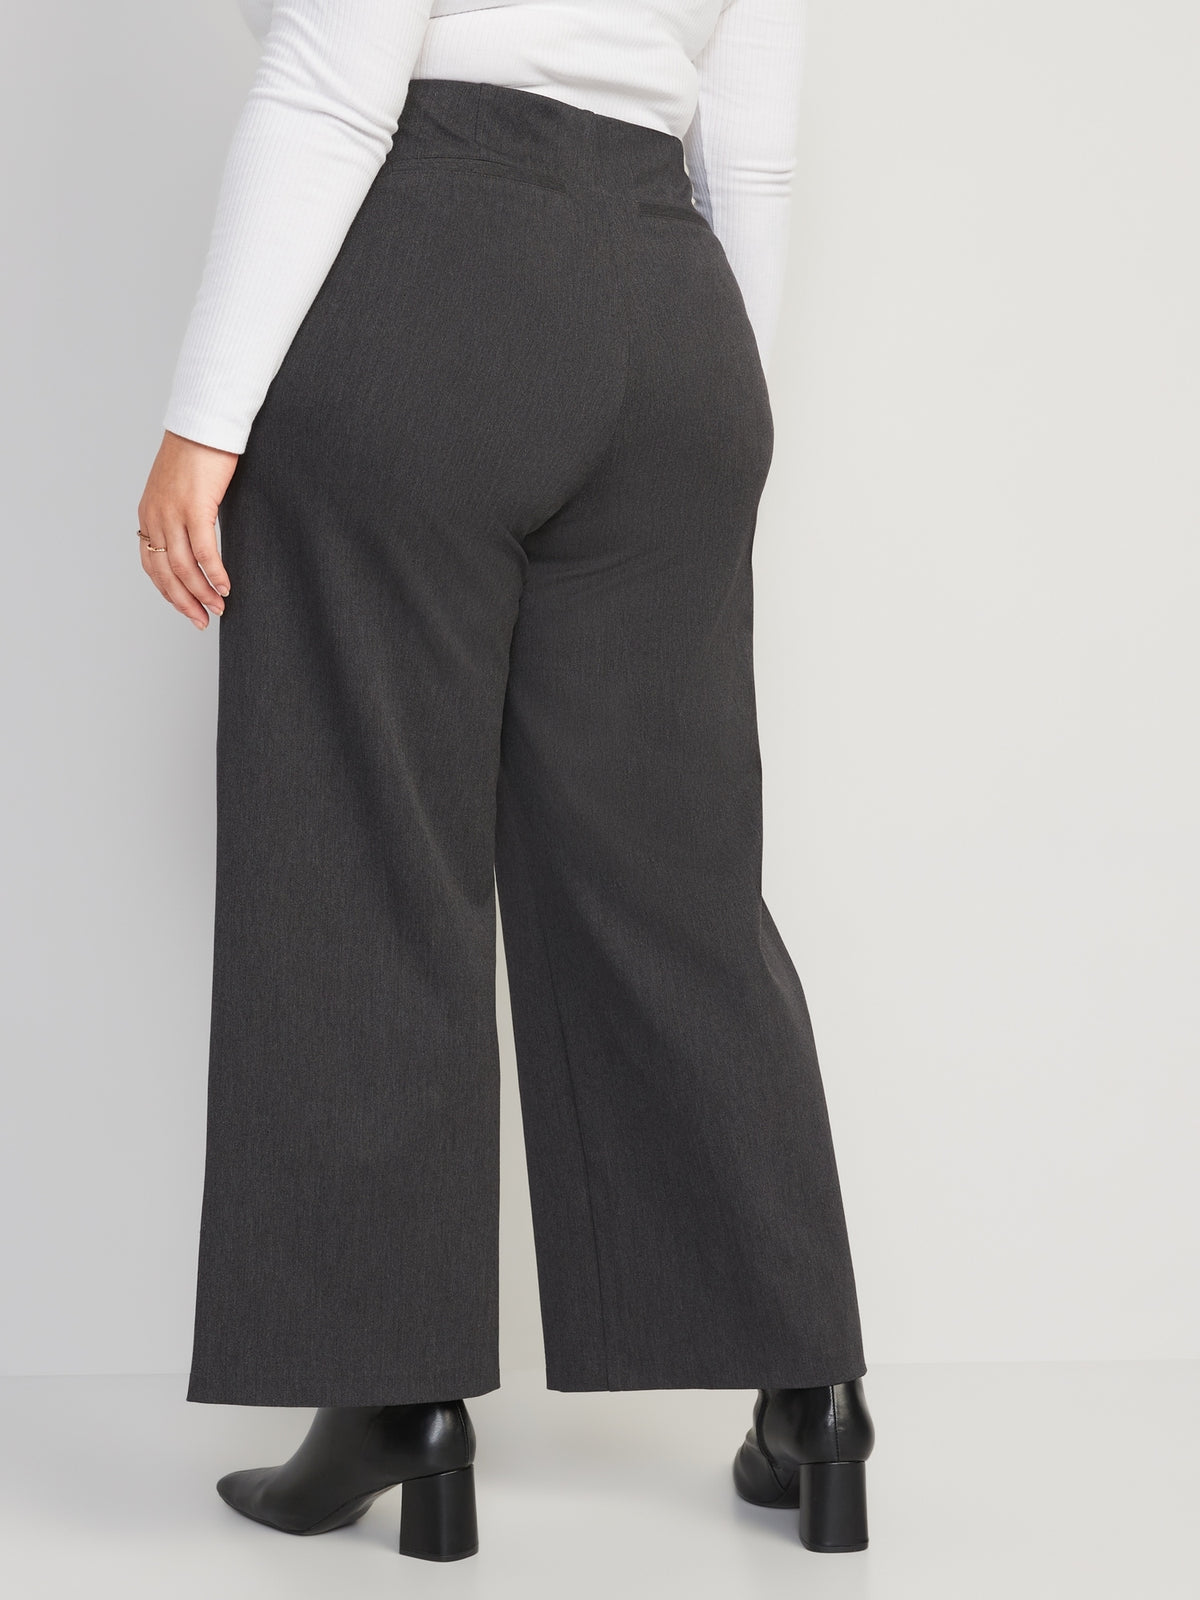 High-Waisted Pull-On Pixie Wide-Leg Pants for Women, Old Navy